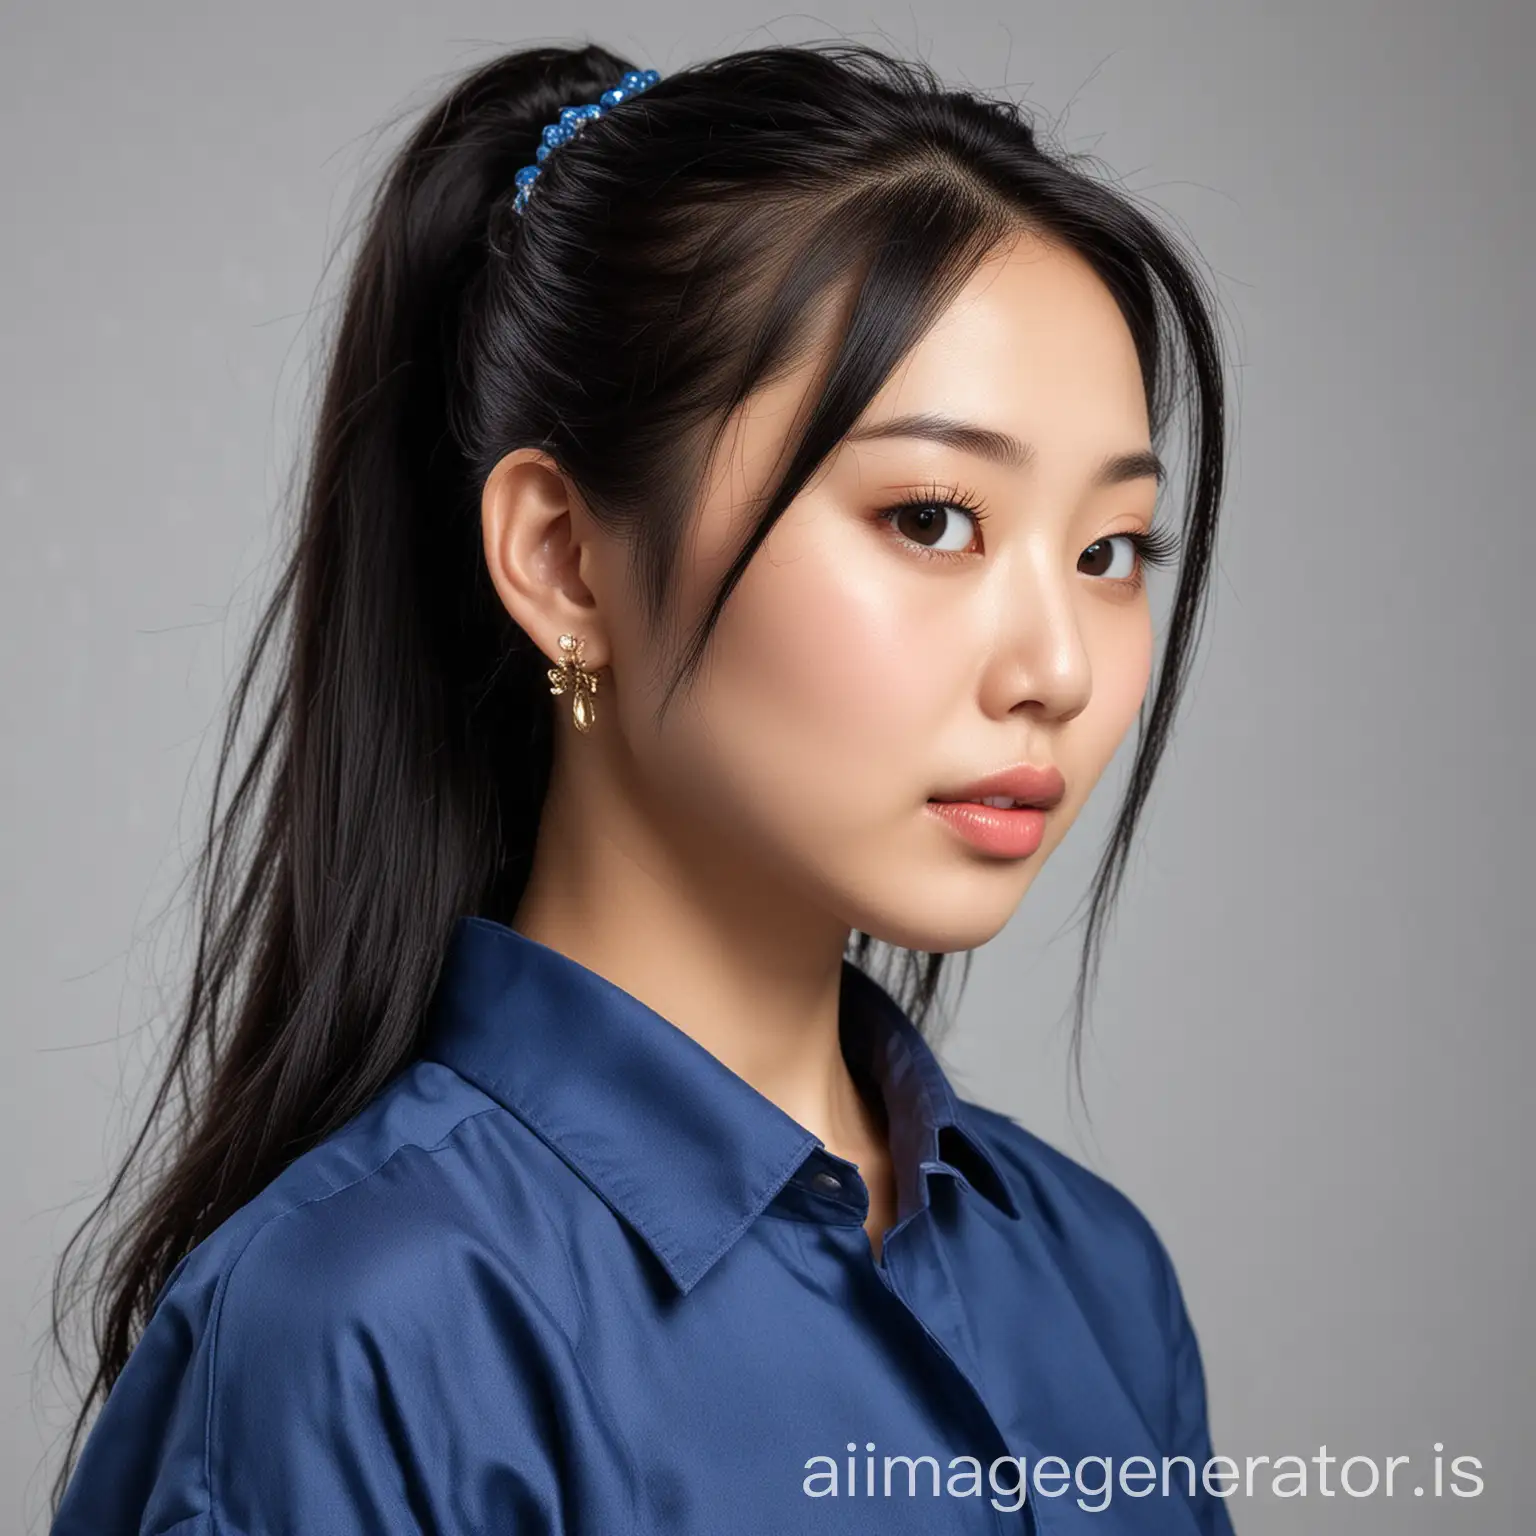 Asian-Woman-Portrait-with-Black-Hair-and-Blue-Blouse-Front-Lighting